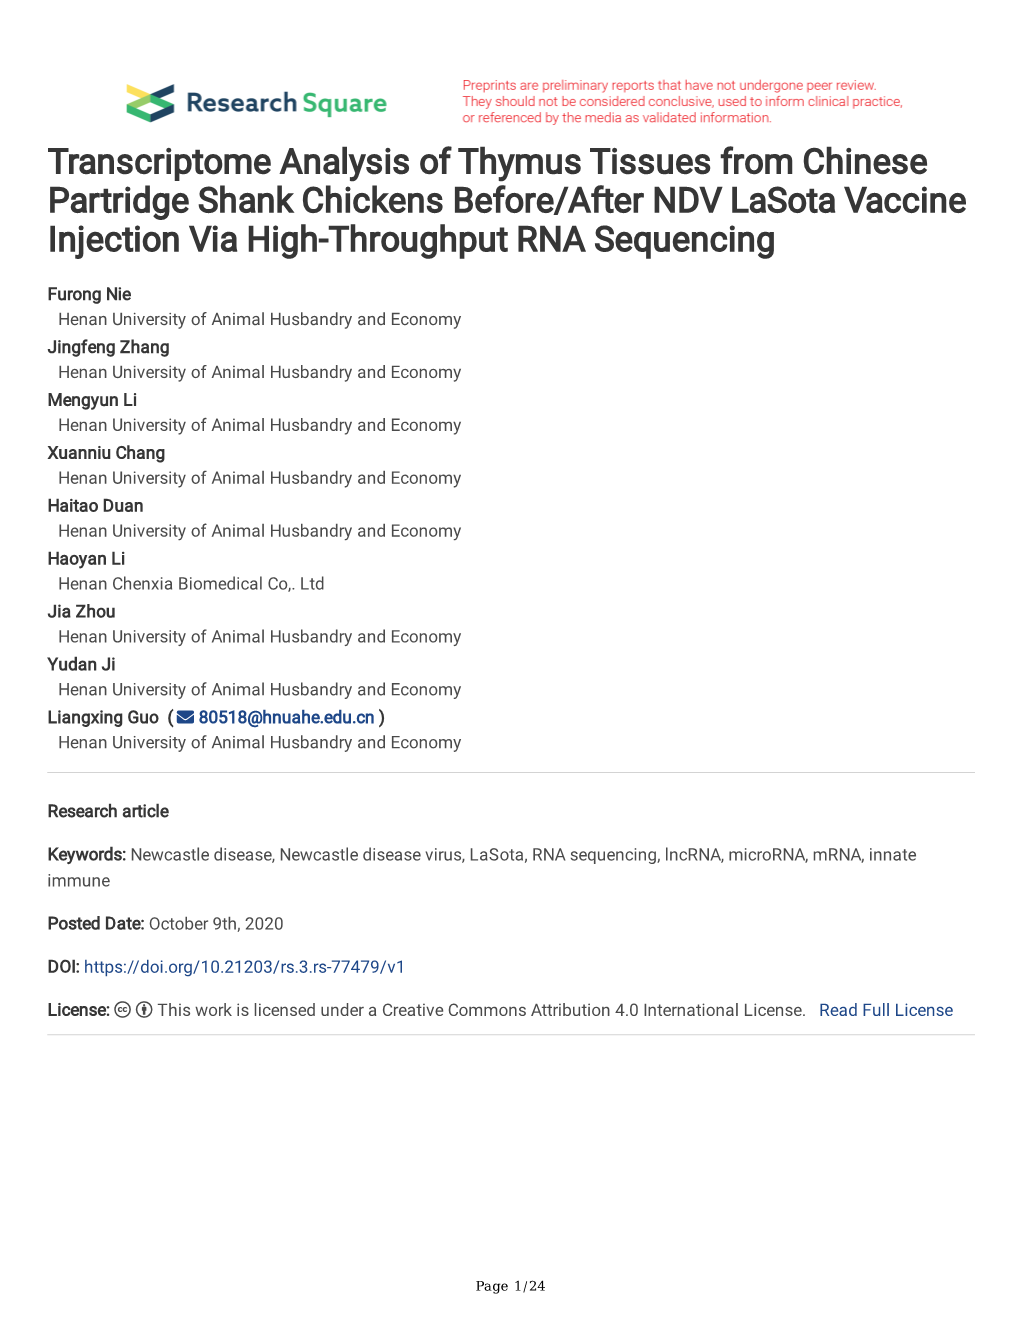 Transcriptome Analysis of Thymus Tissues from Chinese Partridge Shank Chickens Before/After NDV Lasota Vaccine Injection Via High-Throughput RNA Sequencing